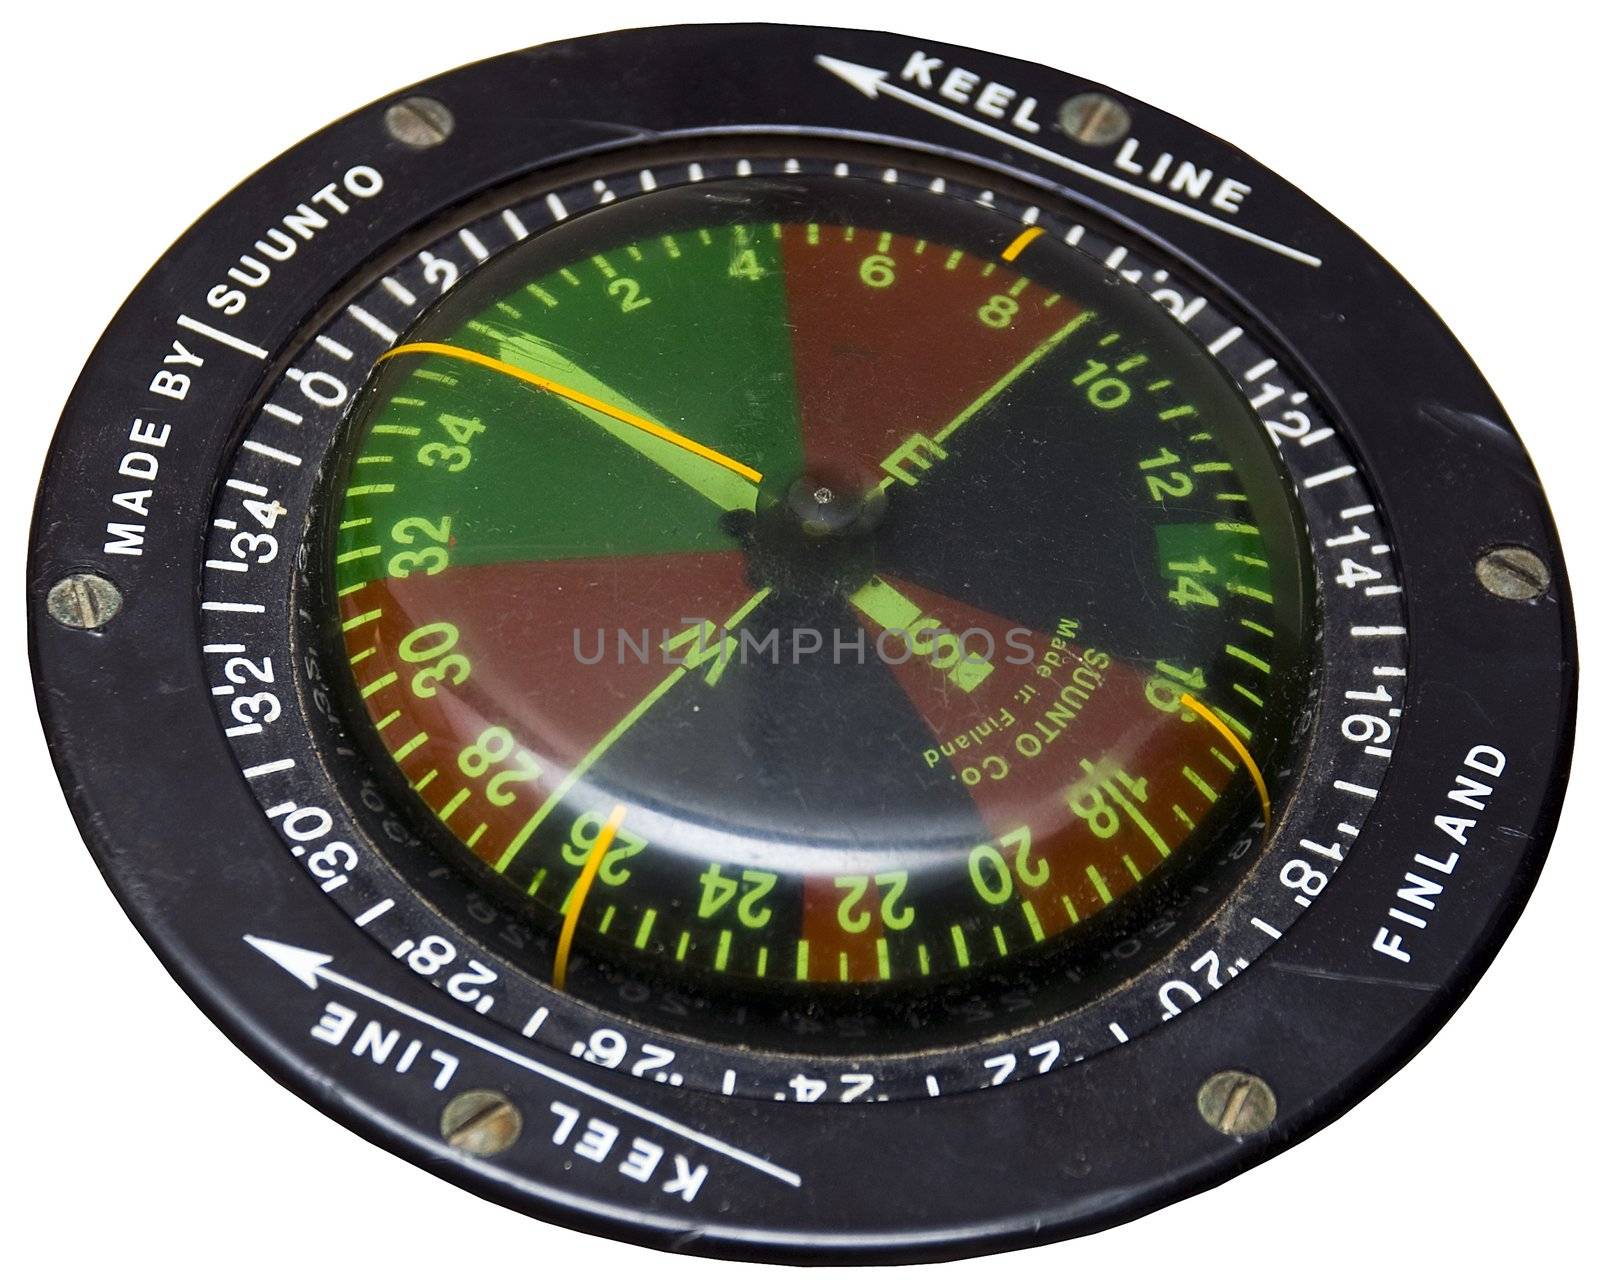 Mariner's compass by Light